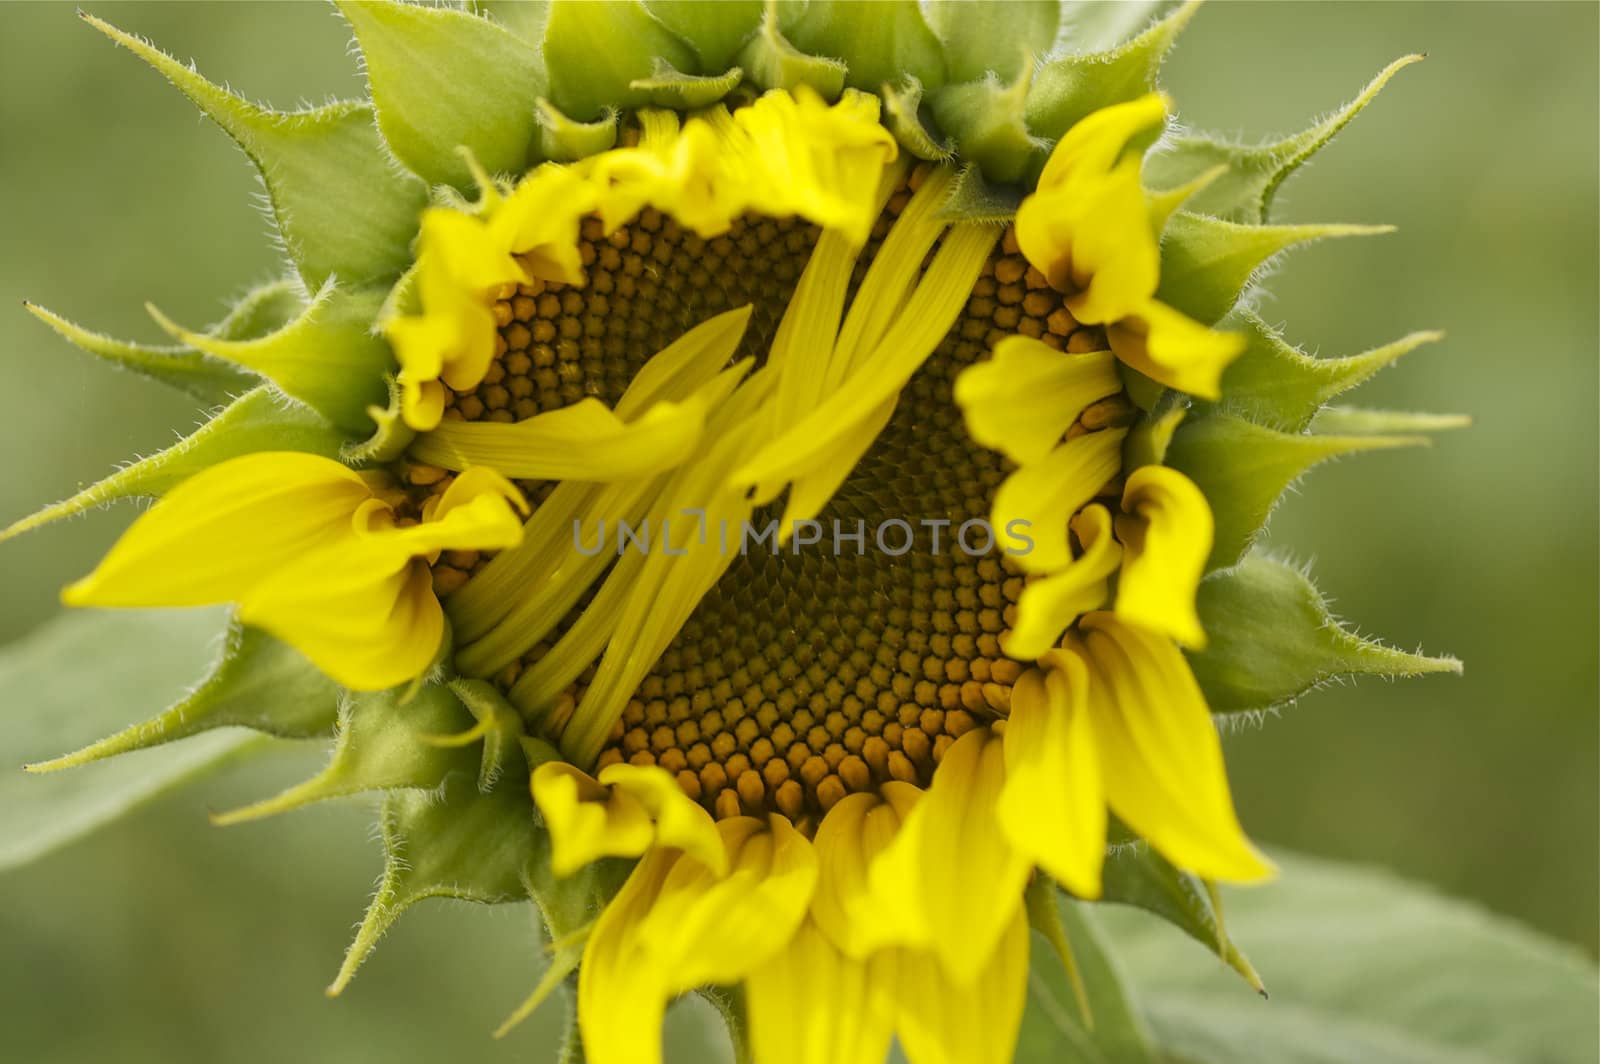 Close up single bright yellow sunflower facing into camera against a green background, with copy space.  Gives the appearance of being shy as some petals are covering it's 'face.'